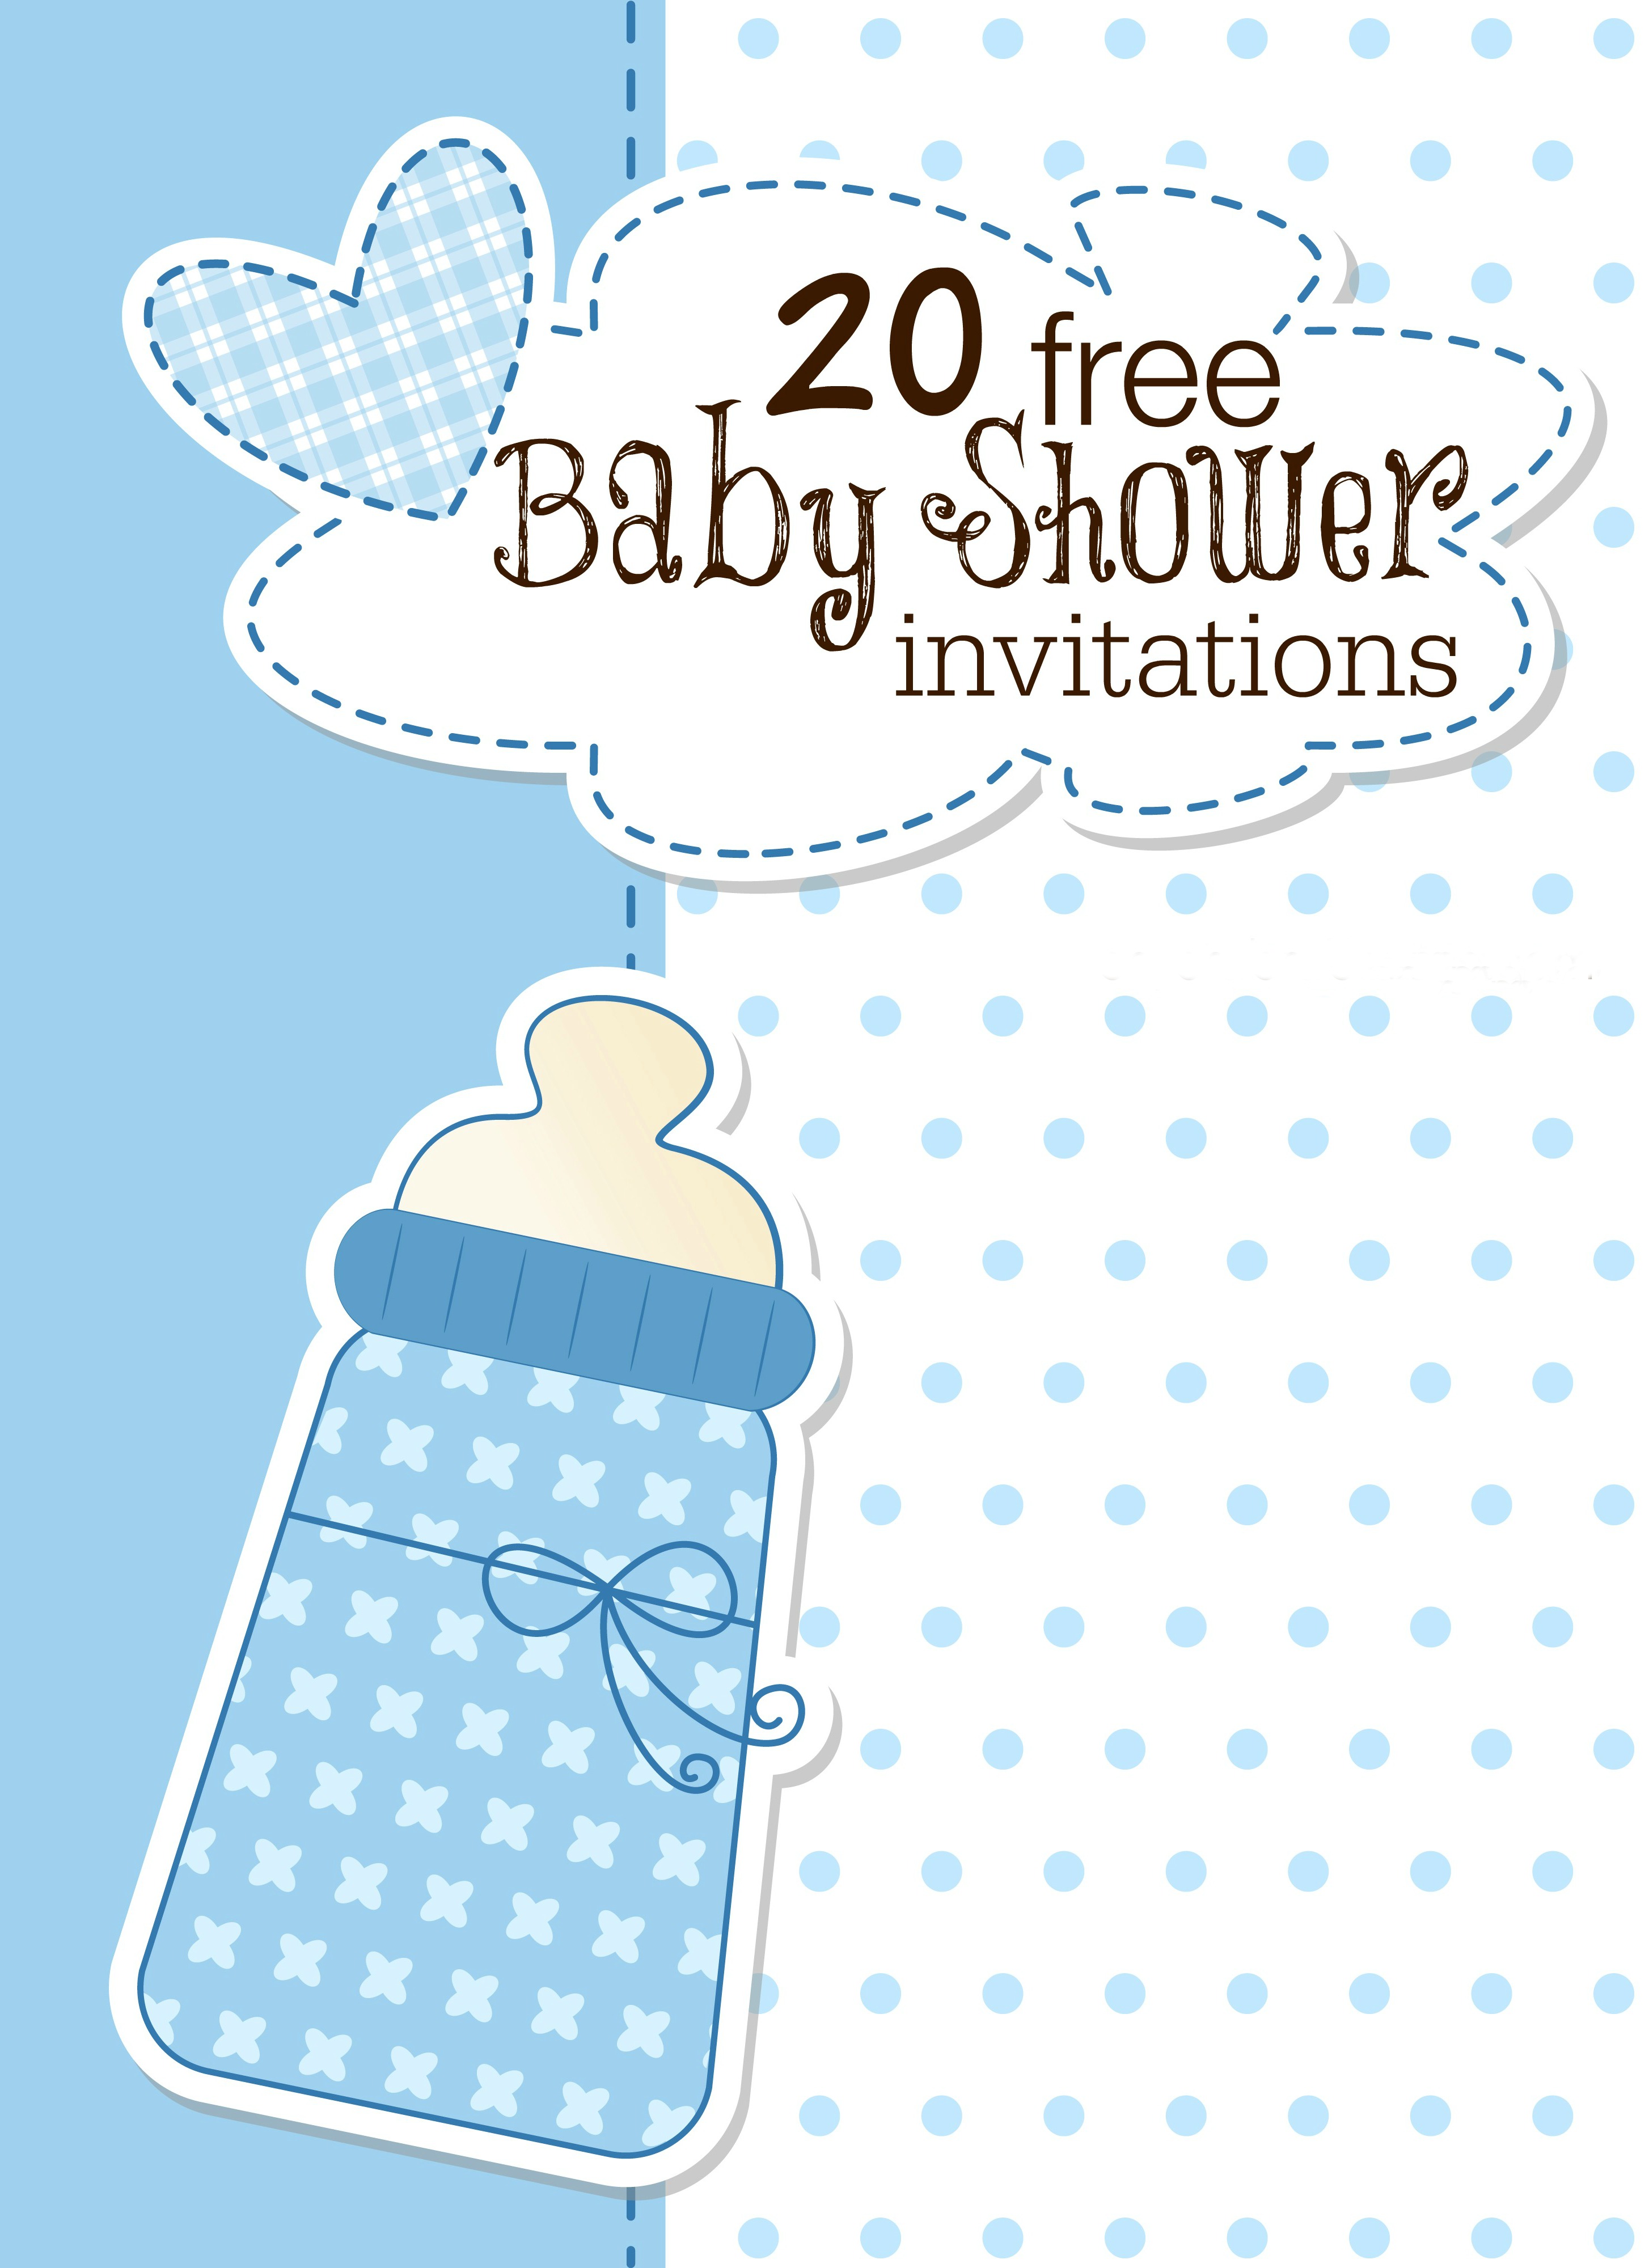 Full Size of Baby Shower:unique Baby Shower Ideas Pinterest Baby Shower Ideas For Girls Baby Girl Themes For Bedroom Unique Baby Shower Decorations Nautical Baby Shower Invitations For Boys Baby Girl Themes For Bedroom Baby Shower Ideas Baby Shower Decorations Themes For Baby Girl Nursery